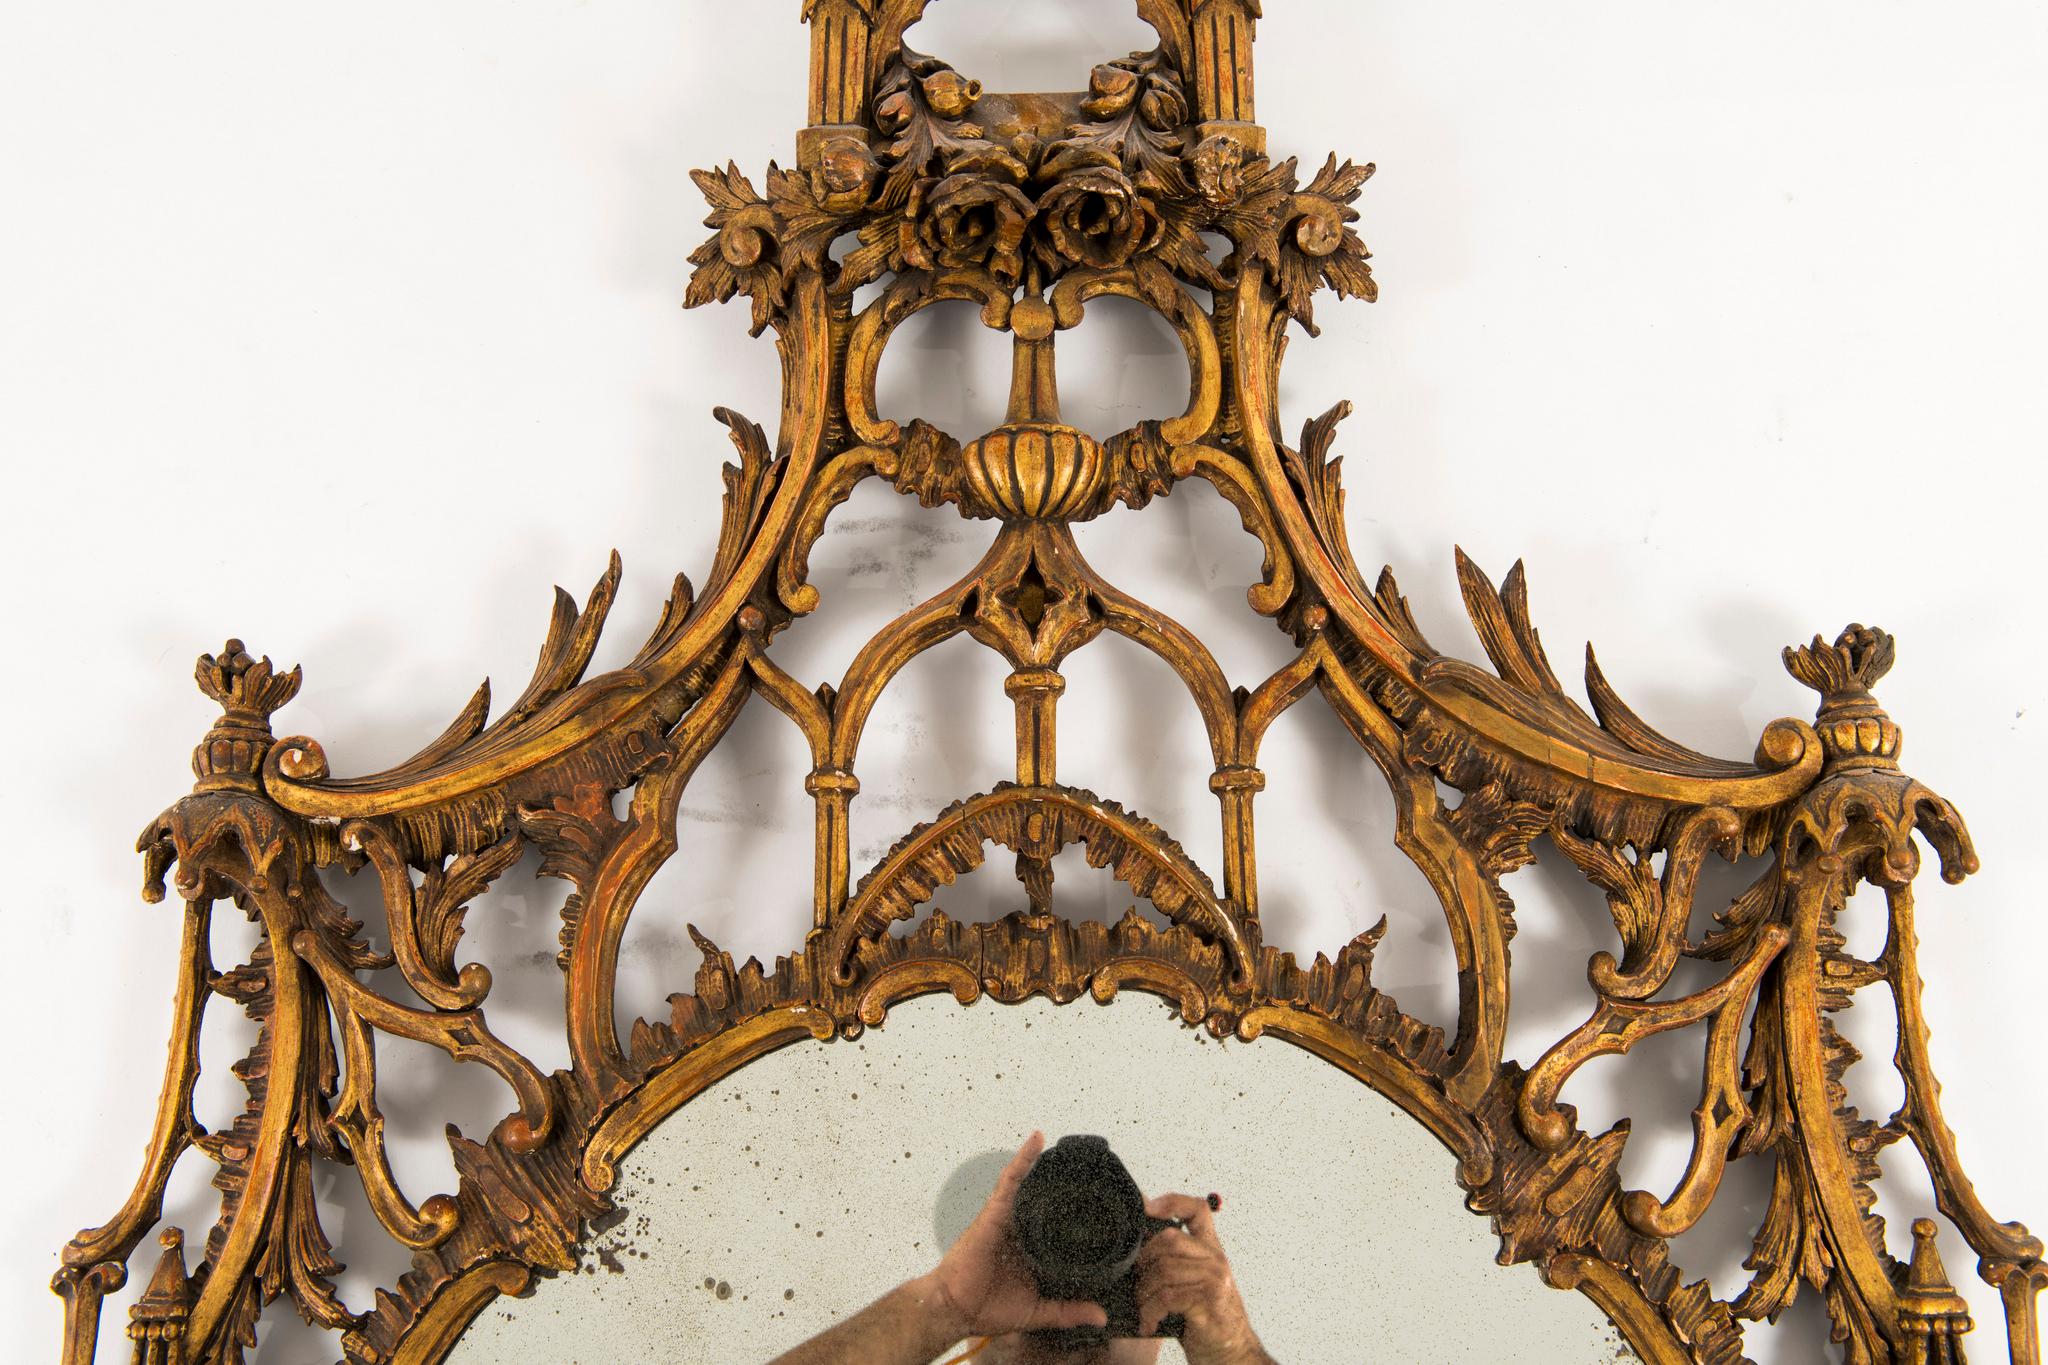 A 19th century English Chippendale giltwood mirror. This Classic chinoiserie style mirror is besieged with a mix of roses, foliage, fretwork, columns and gabled roofs.